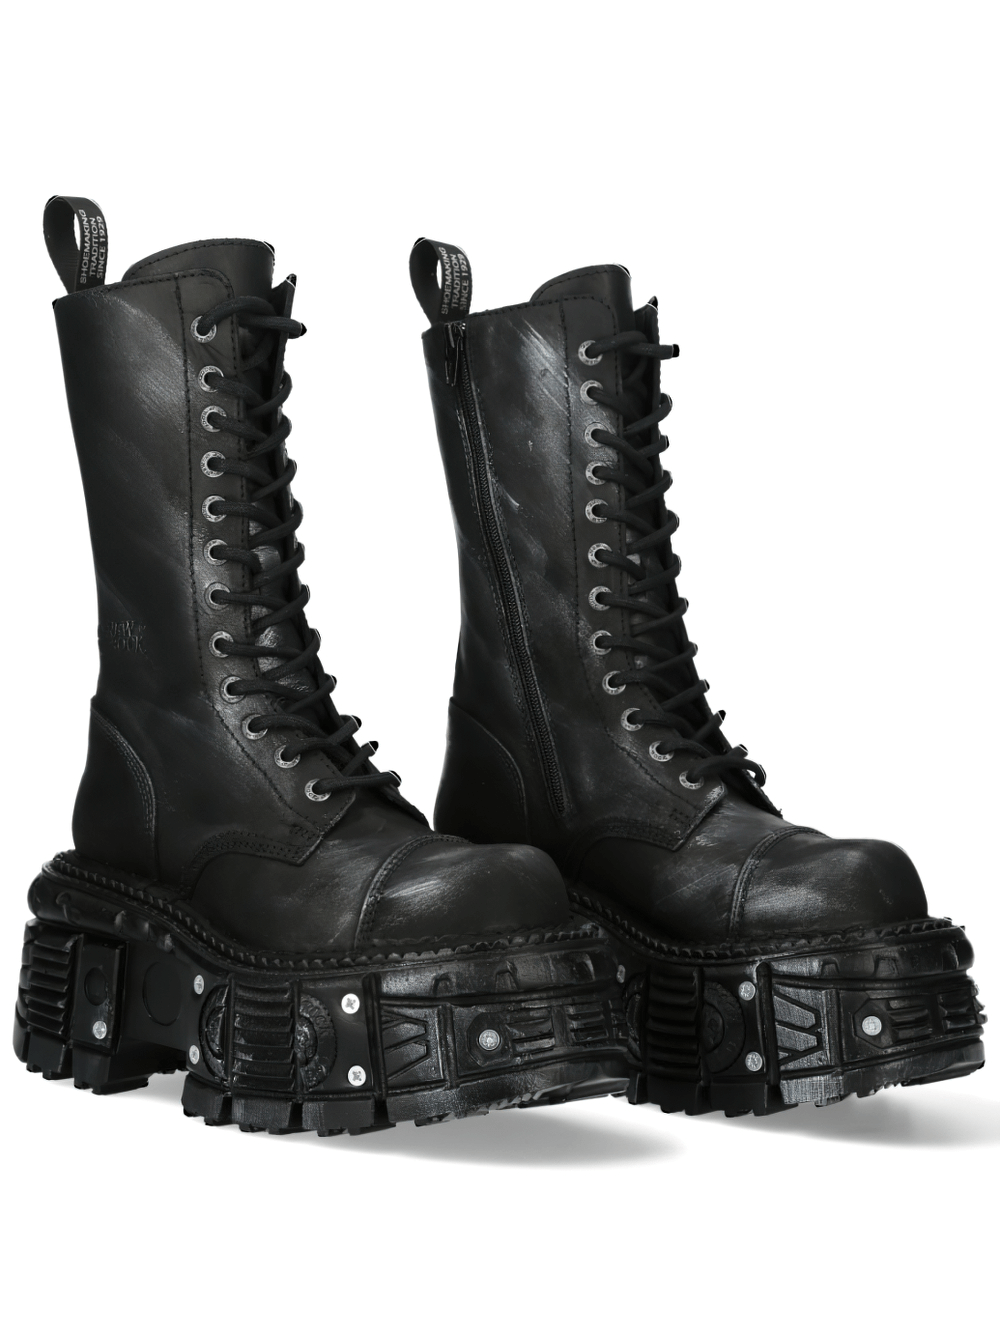 NEW ROCK Rugged Leather Biker Combat Boots with Zipper